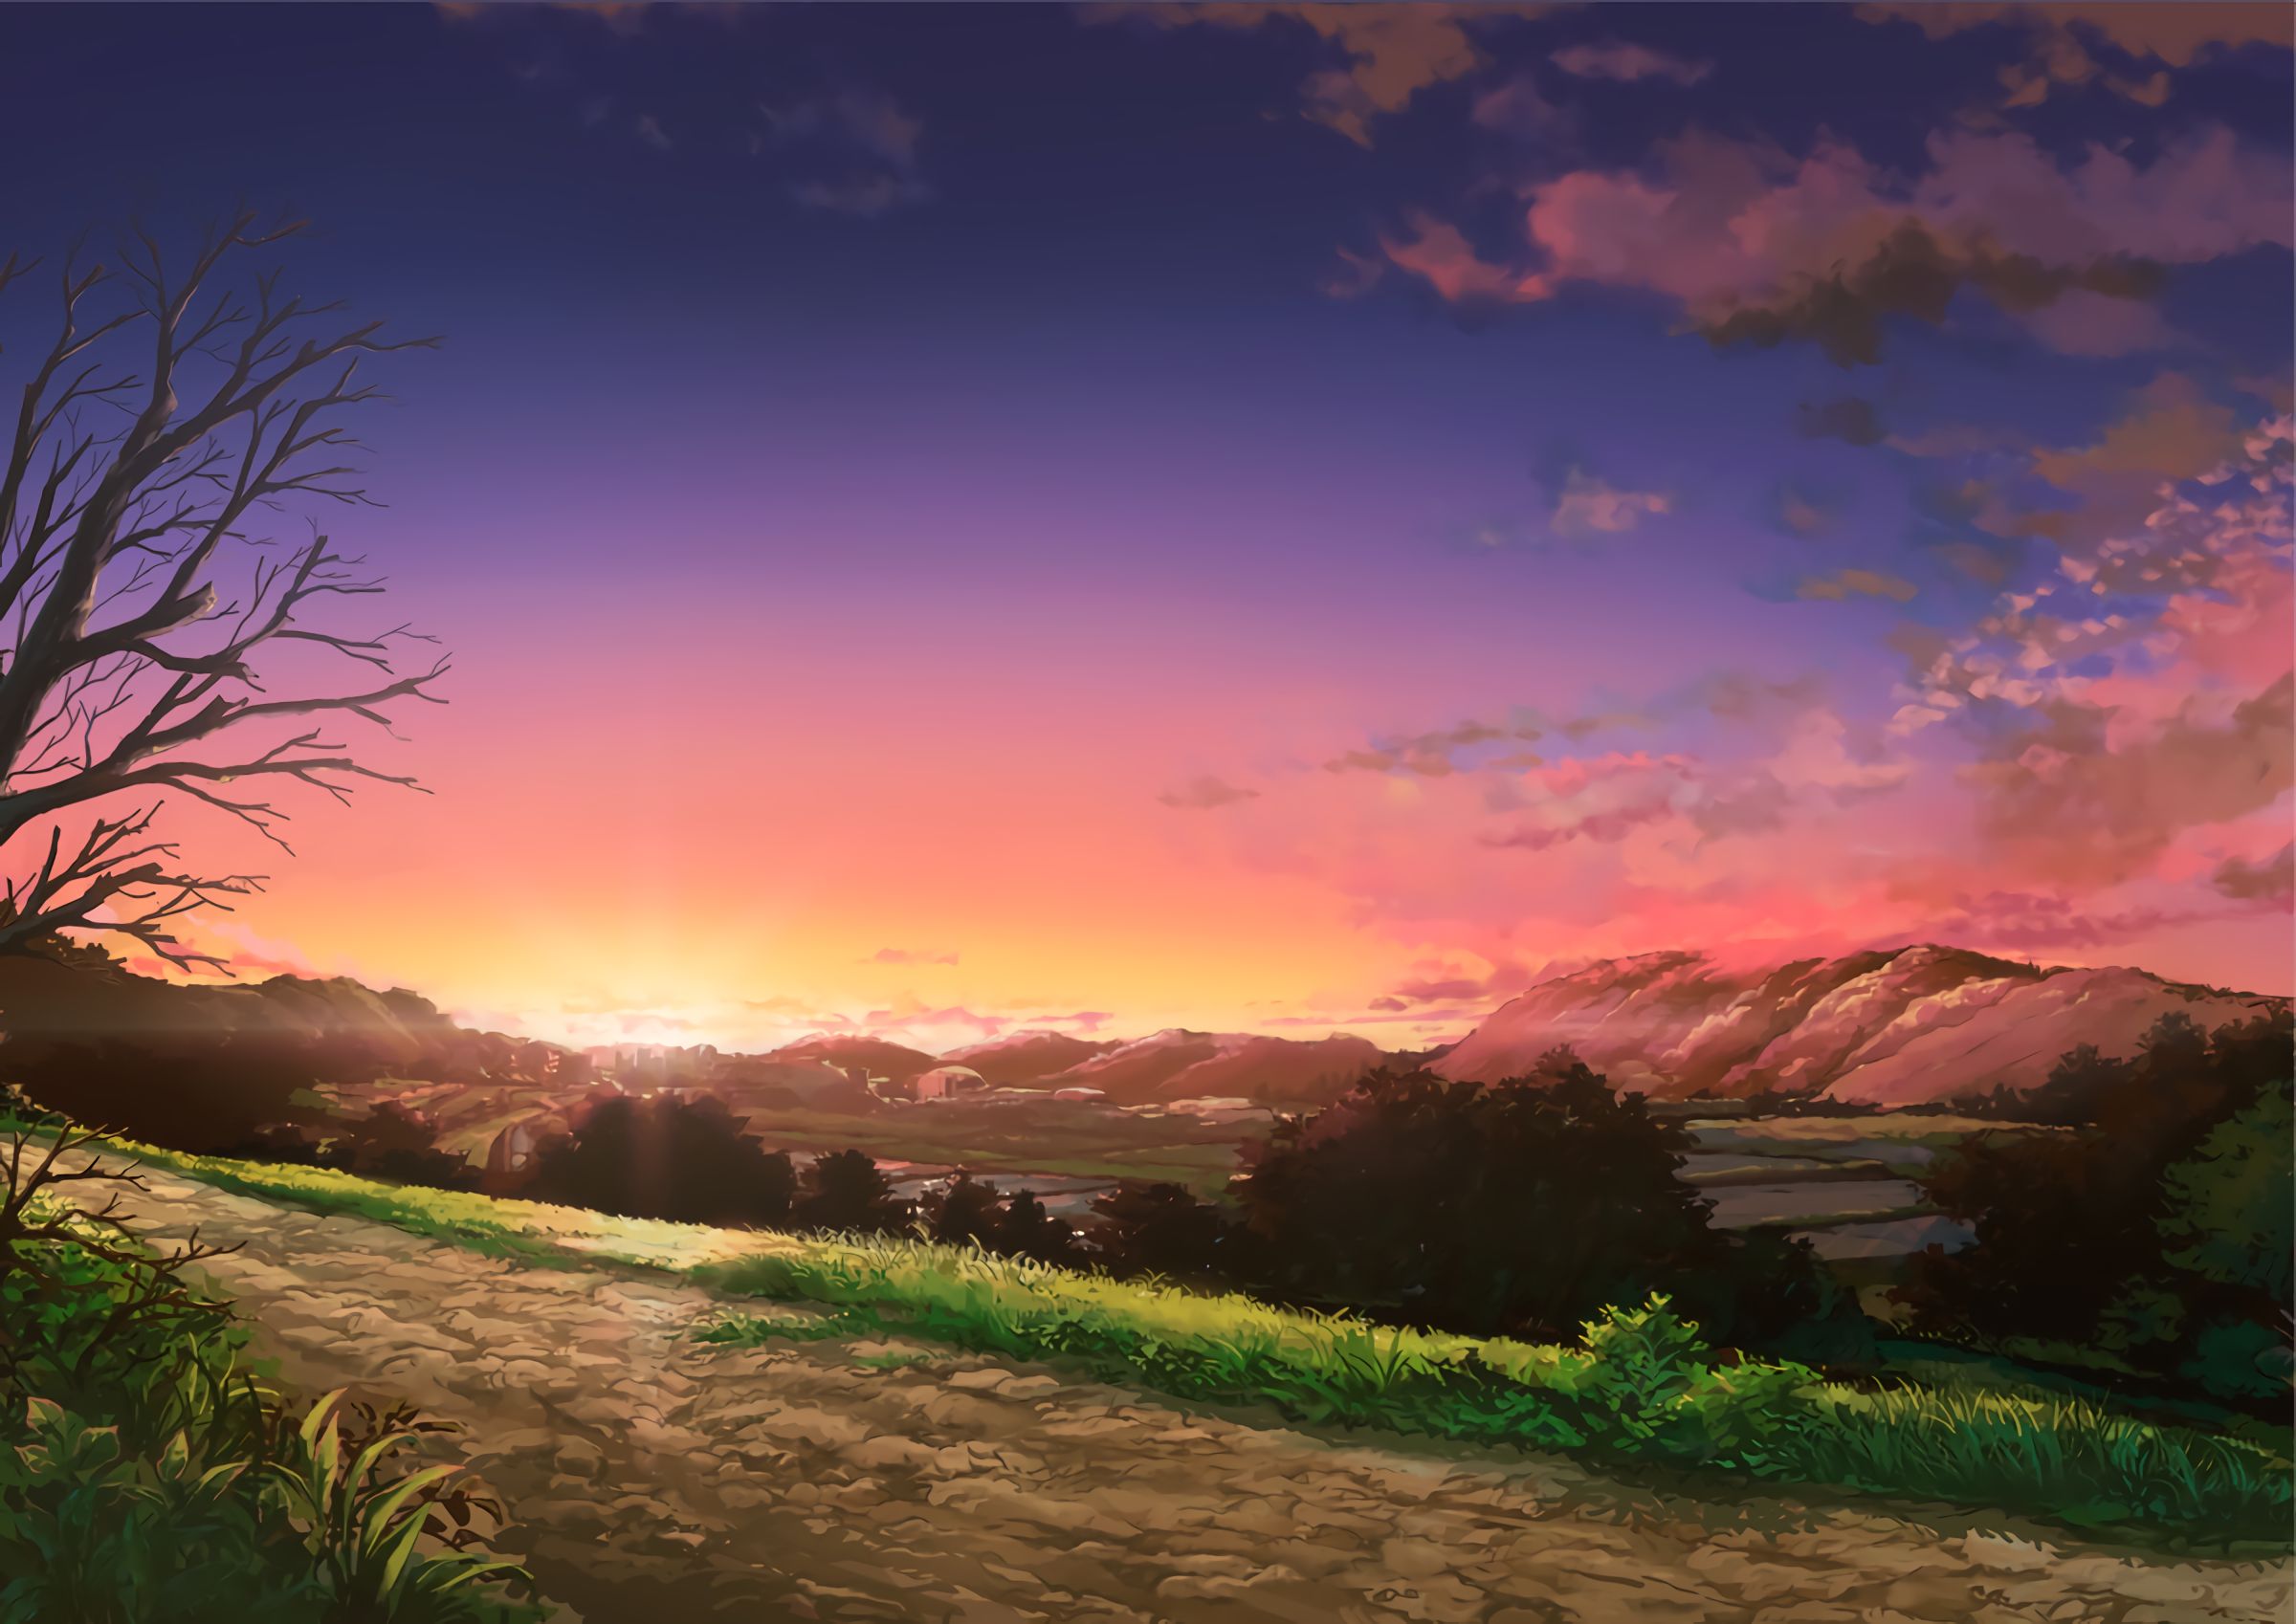  Sunset HQ Background Images